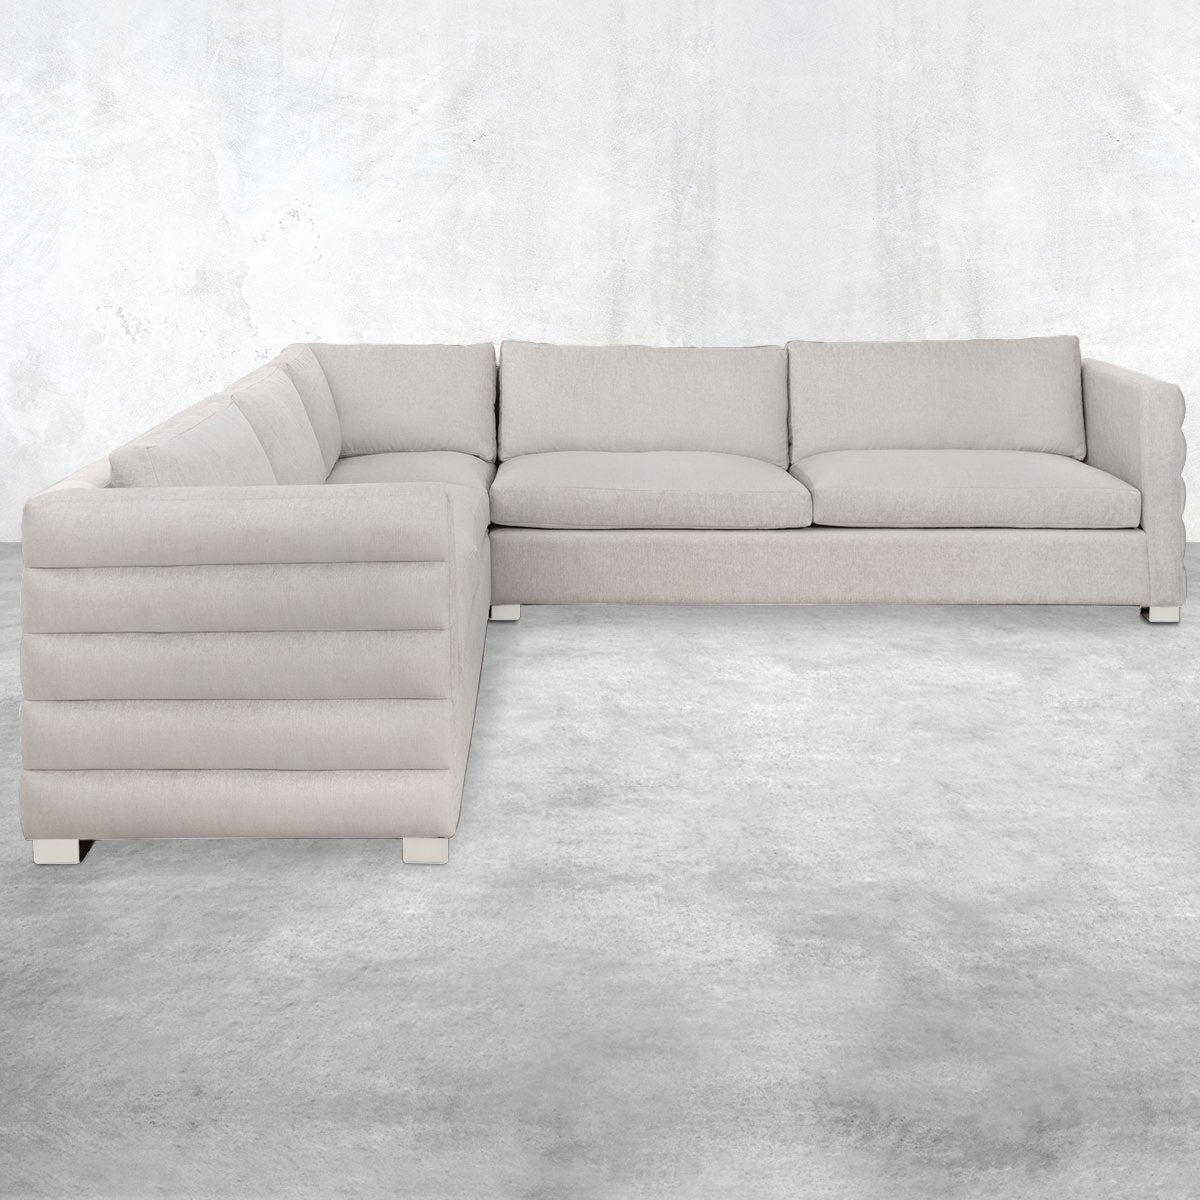 Shoreclub Sectional with Channel Tufted Arms